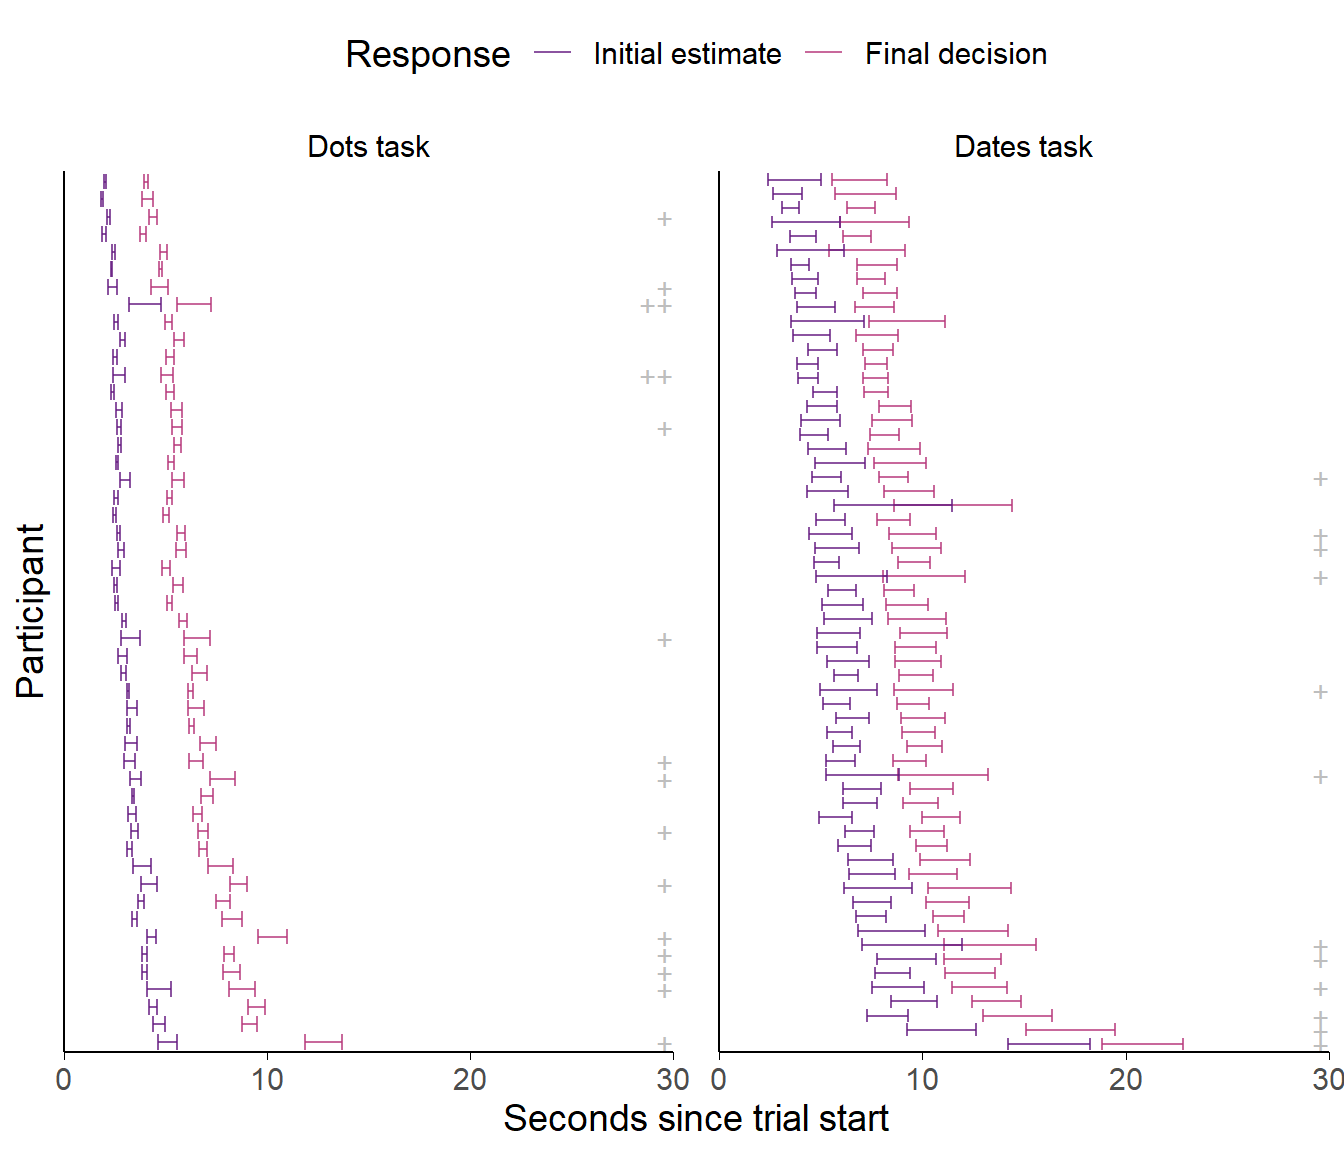 Response times for the Dots and Dates tasks with in/accurate advisors.<br/> Each row indicates a single participant's trials. The error bars show the 95\% confidence intervals of the mean response time for each decision. The plusses on the right show the number of trials where response times were more than 3 standard deviations away from the mean of all Dates task final response times (rounded to the next 10s): + = 1-5 trials, ++ = 6-10 trials.